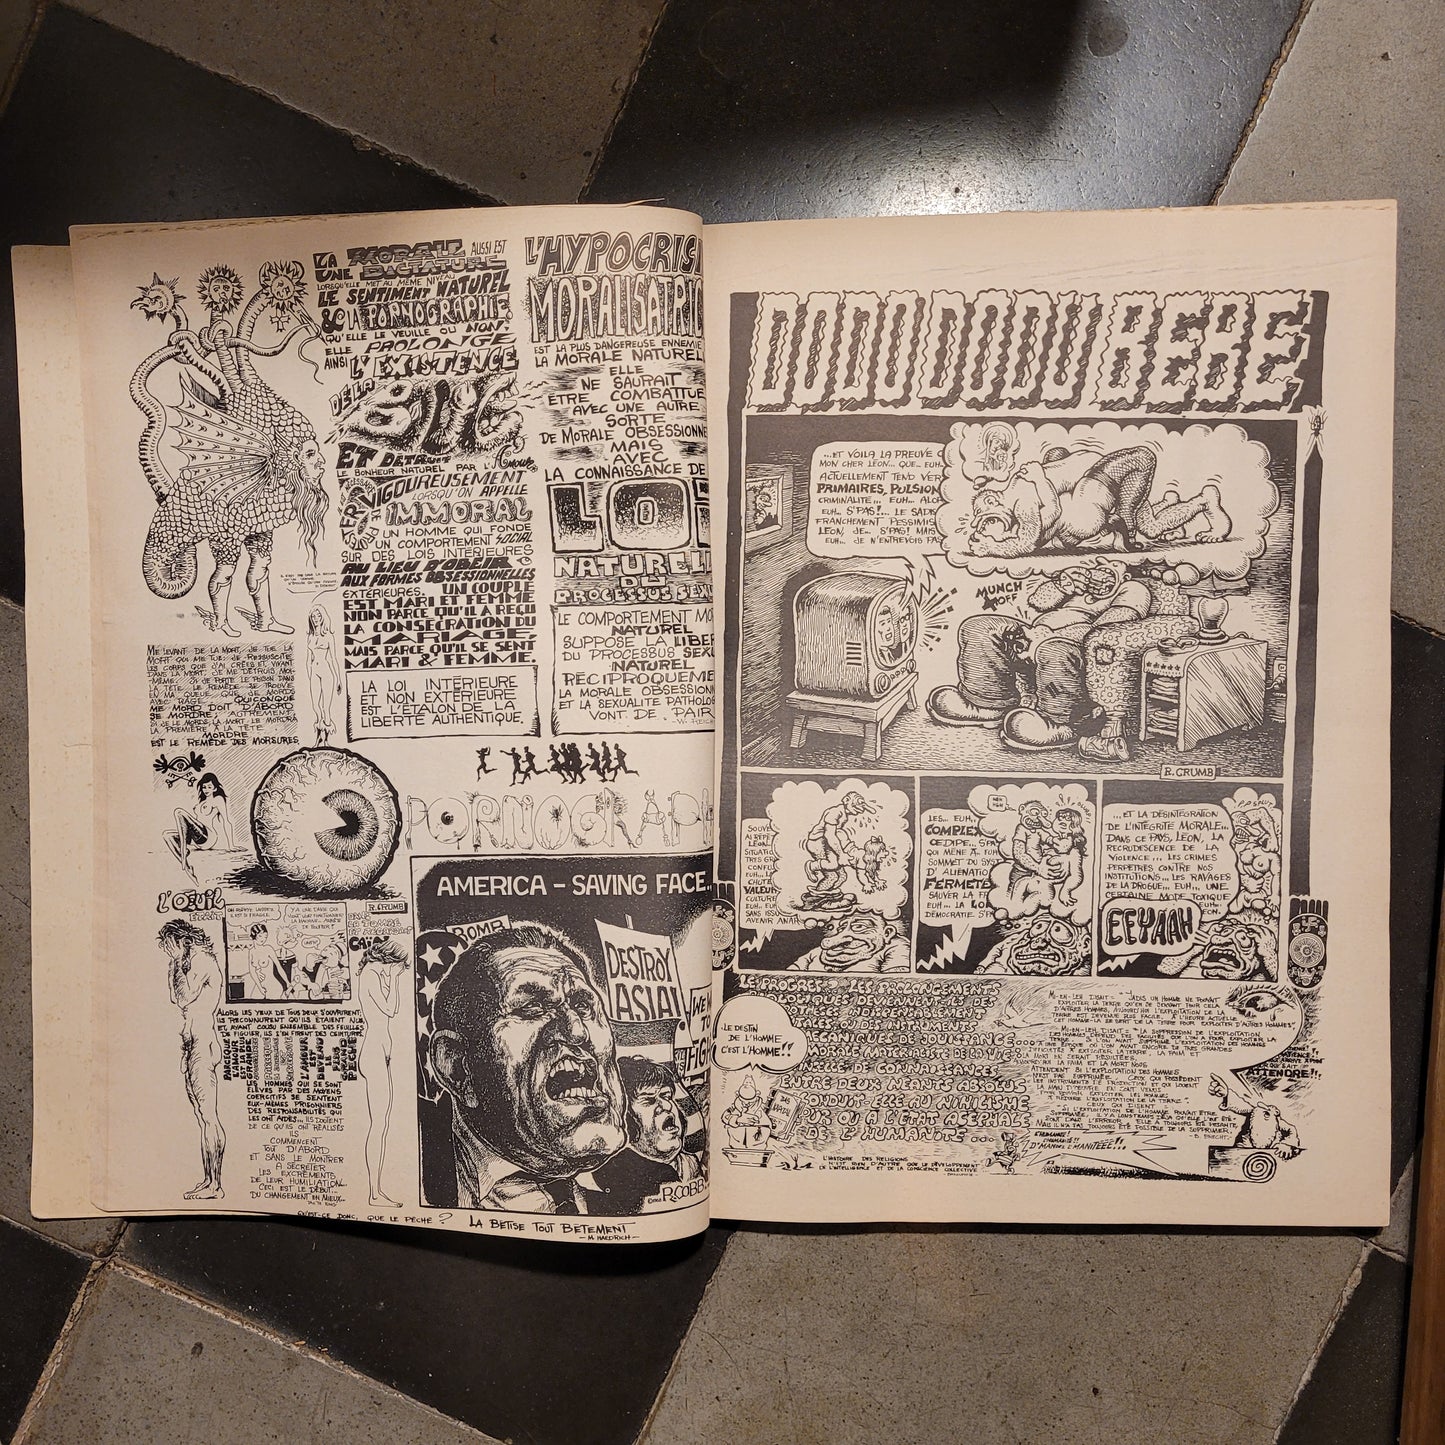 Extremly rare book about 60's and 70's world counter culture